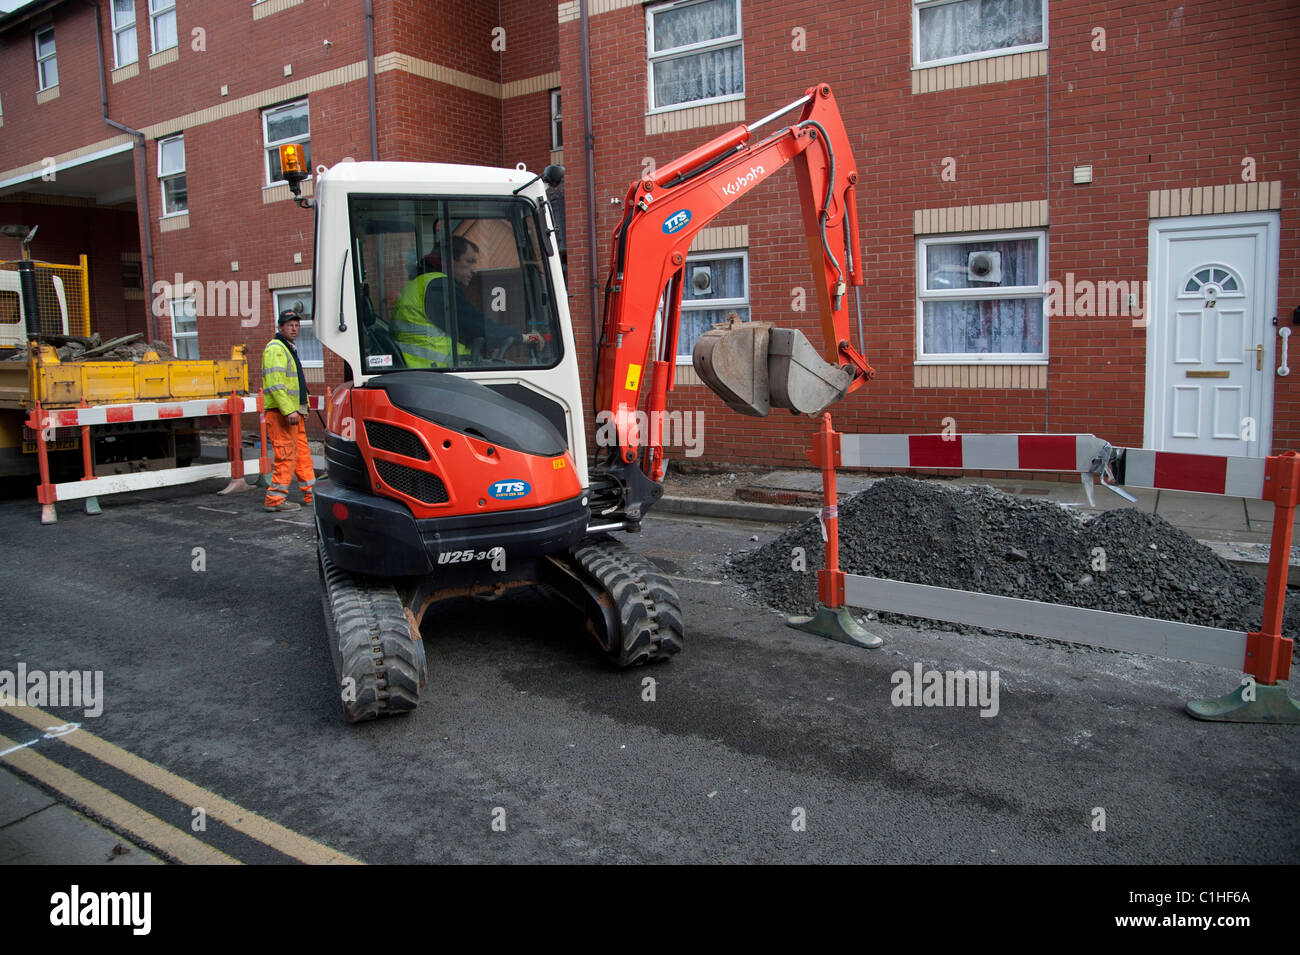 A mini digger excavating on a street, replacing old pavement, UK Stock Photo